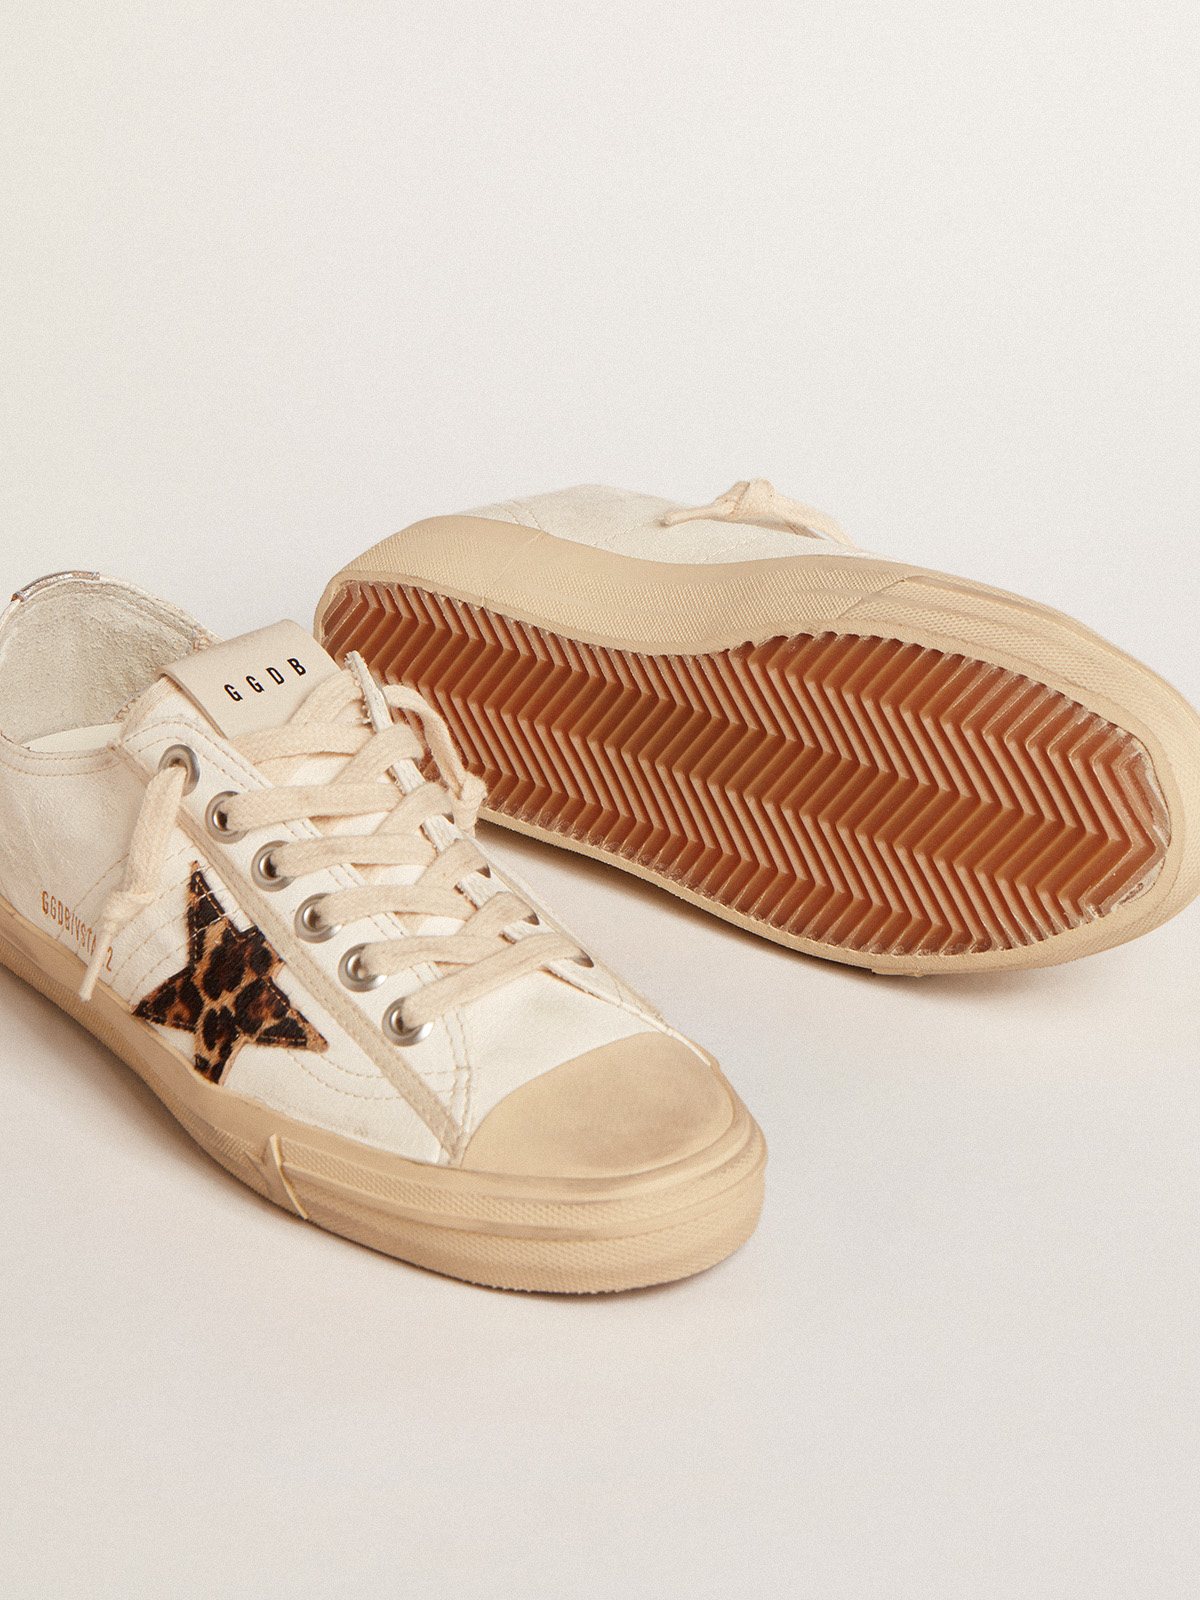 V-Star LTD in nappa with pony skin star and silver heel tab | Golden Goose